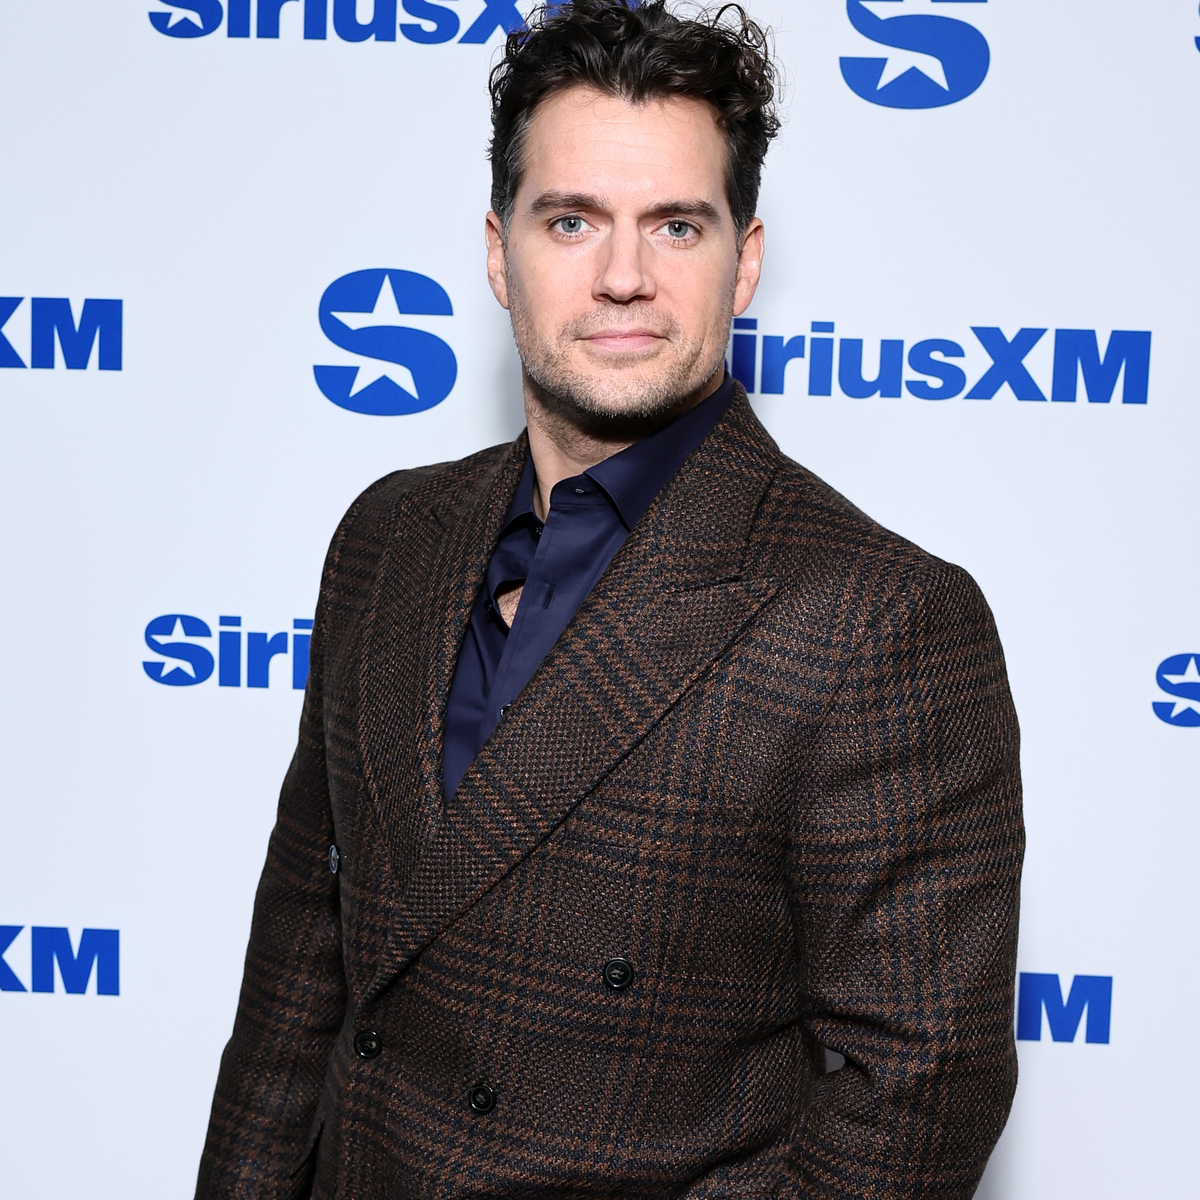 Henry Cavill Shares How He’s Preparing for Fatherhood